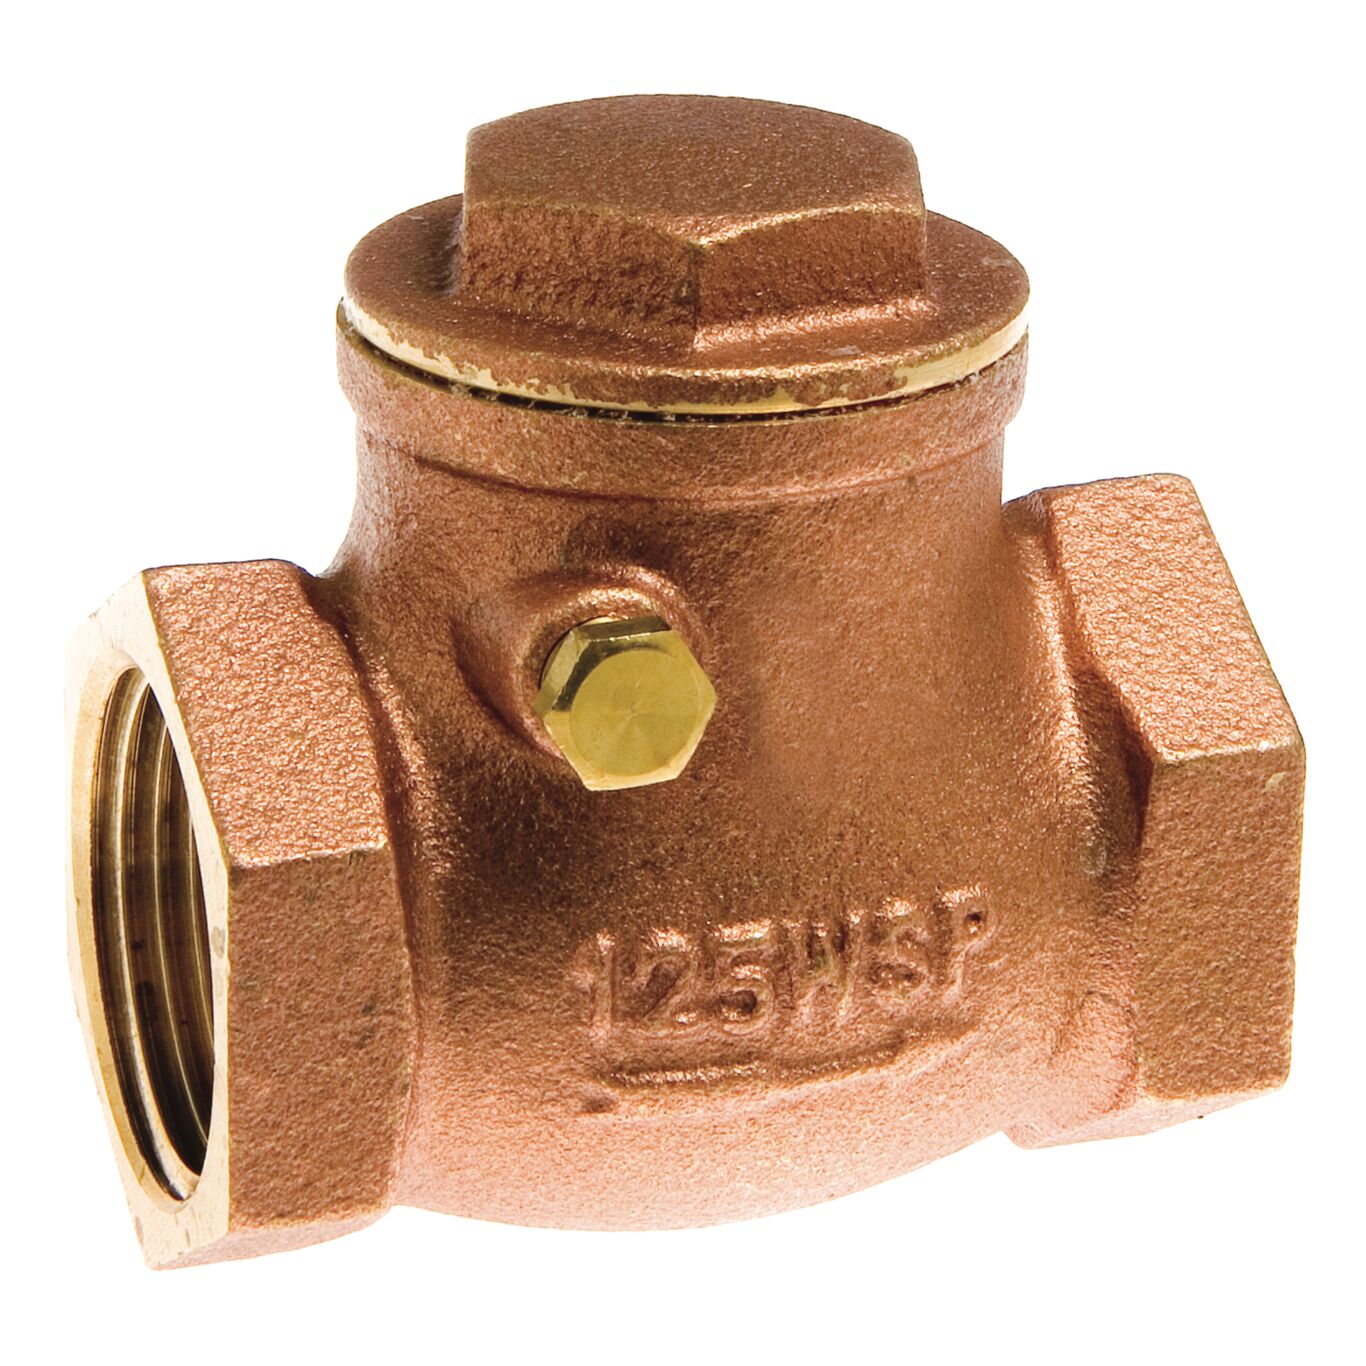 FNPT,200 WOG,Lead Free,Backflow Preventer,for Tankless Water Heater,Pressure Pumps,Boilers,and HVAC Systems CMI Inc 1 Inch Brass Spring Check Valve,1 in X 1 in 1 inch